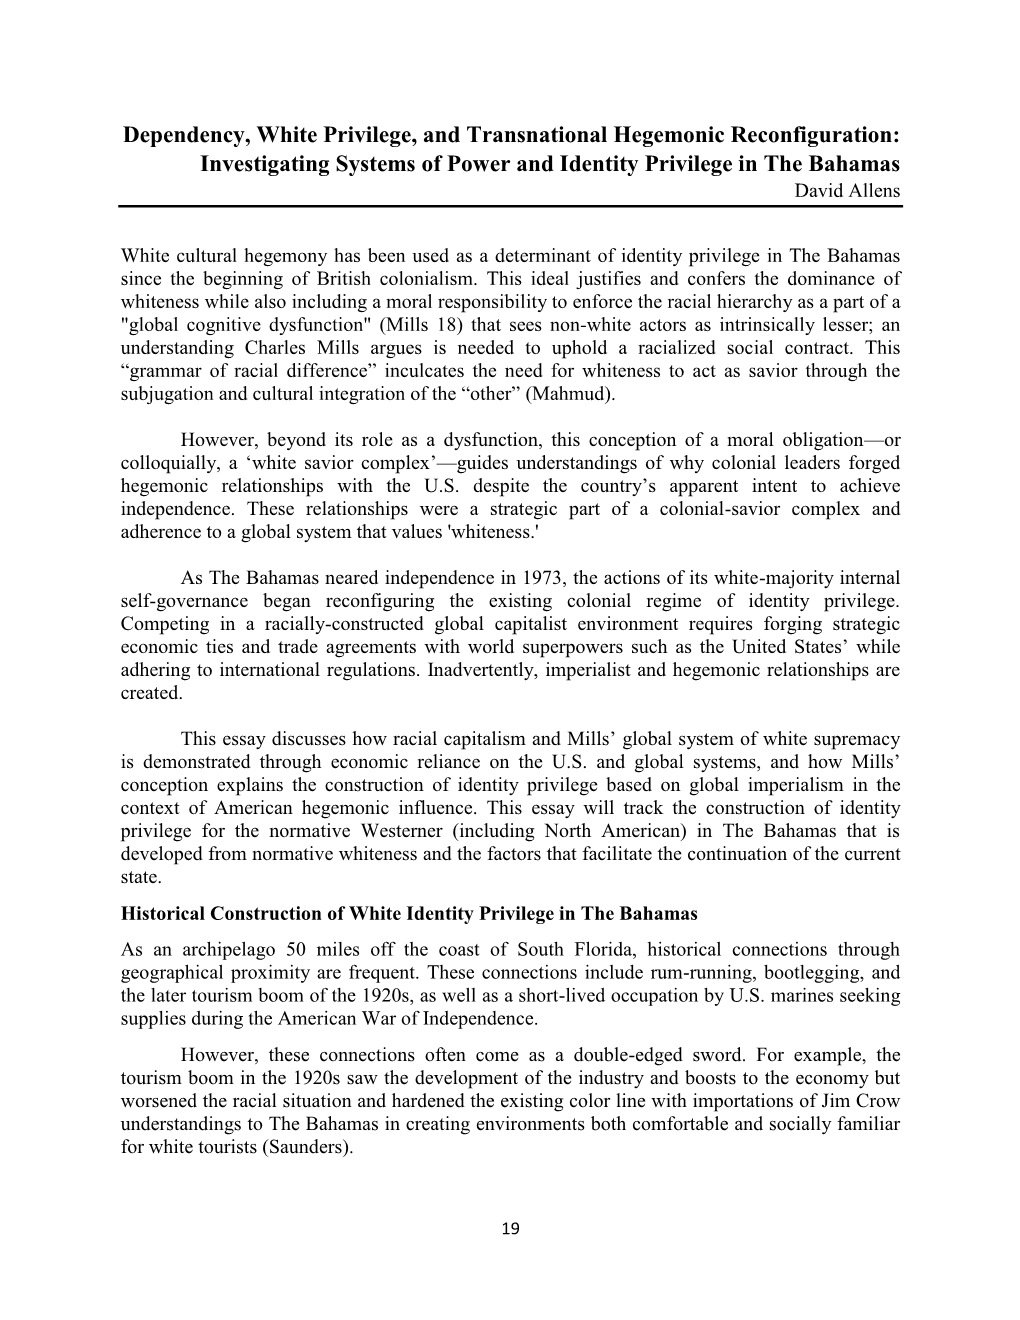 Dependency, White Privilege, and Transnational Hegemonic Reconfiguration: Investigating Systems of Power and Identity Privilege in the Bahamas David Allens